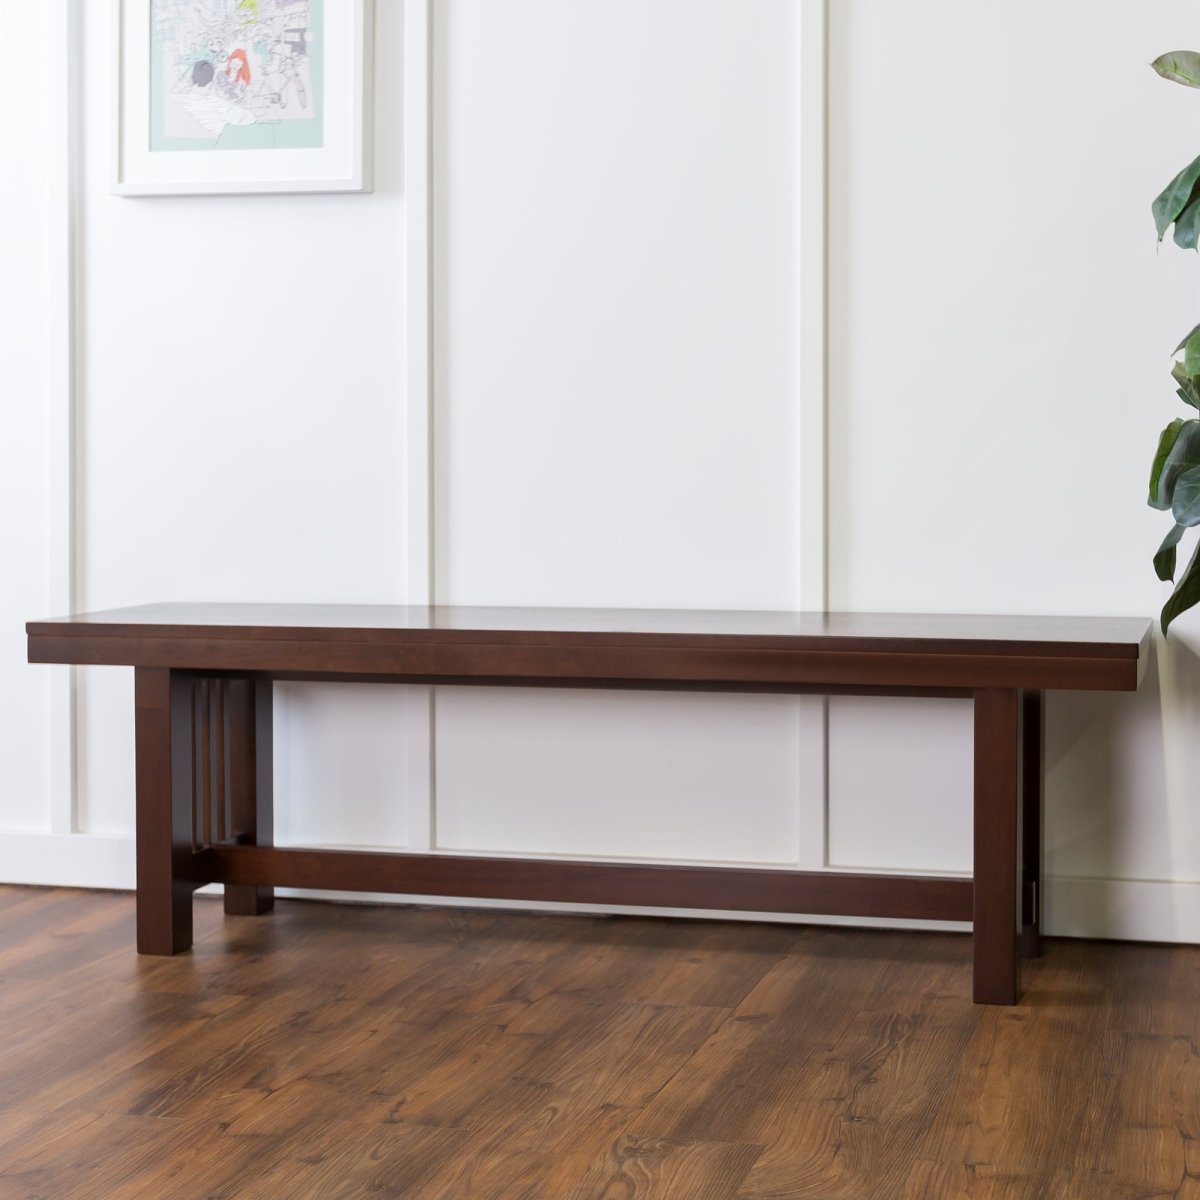 Walker Edison Wood Dining Bench - lily & onyx